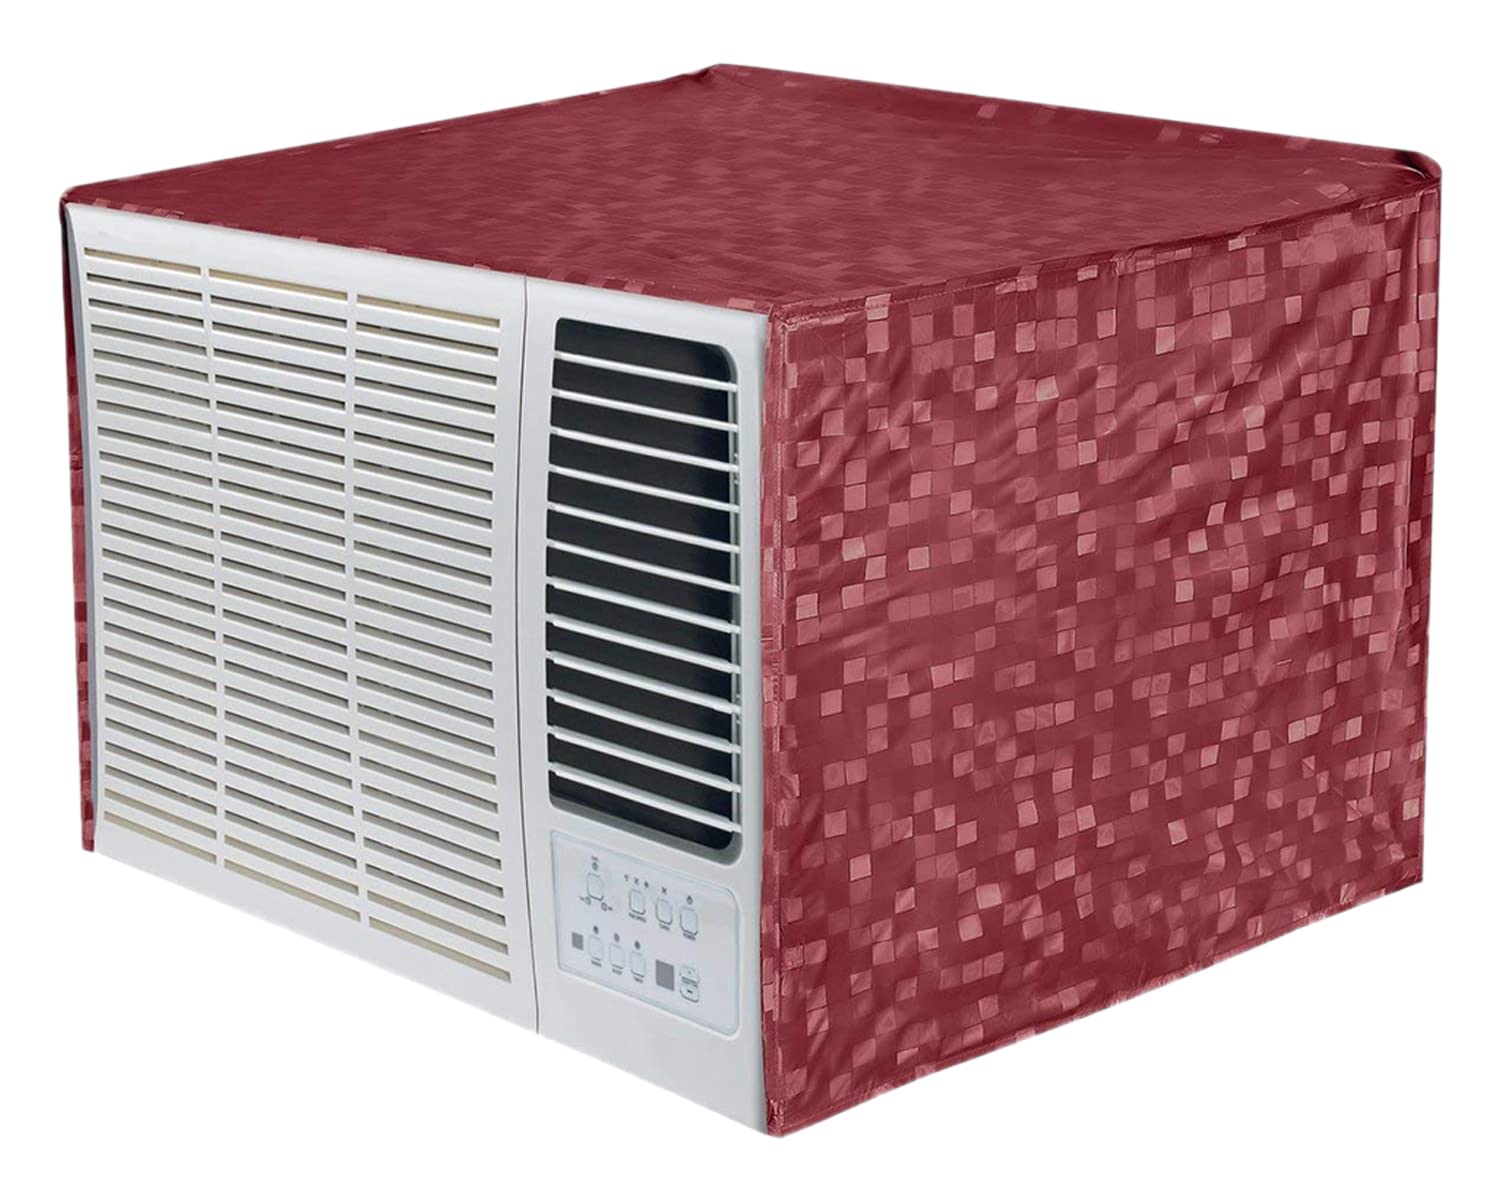 Kuber Industries 3D Design PVC Window AC Cover for 2 Ton Capacity - Maroon (CTKTC01715), Standard